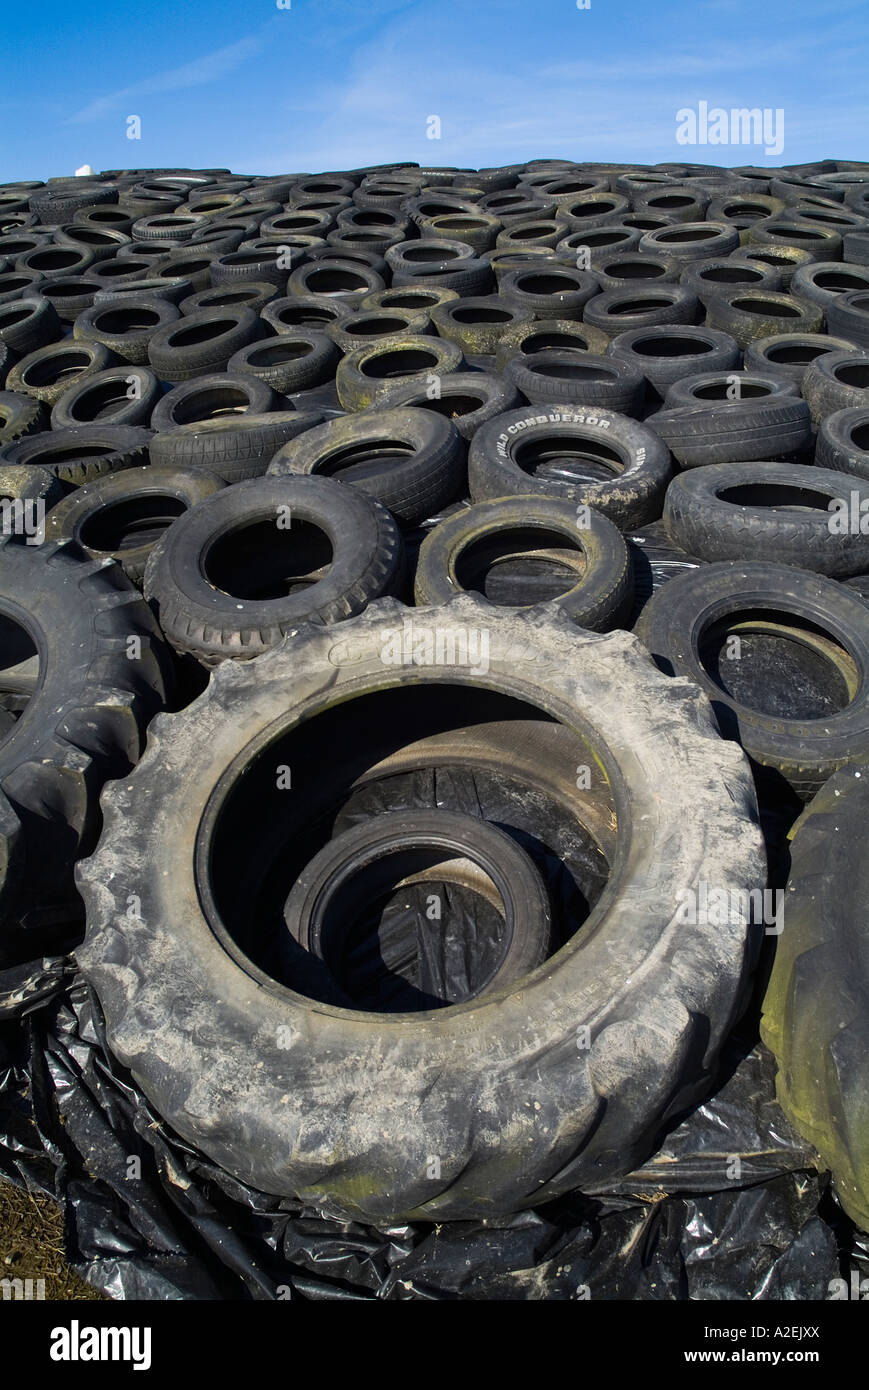 dh Silage pit SILAGE UK Tractor and car tyres weighing down black plastic covering on silage pit farm Stock Photo